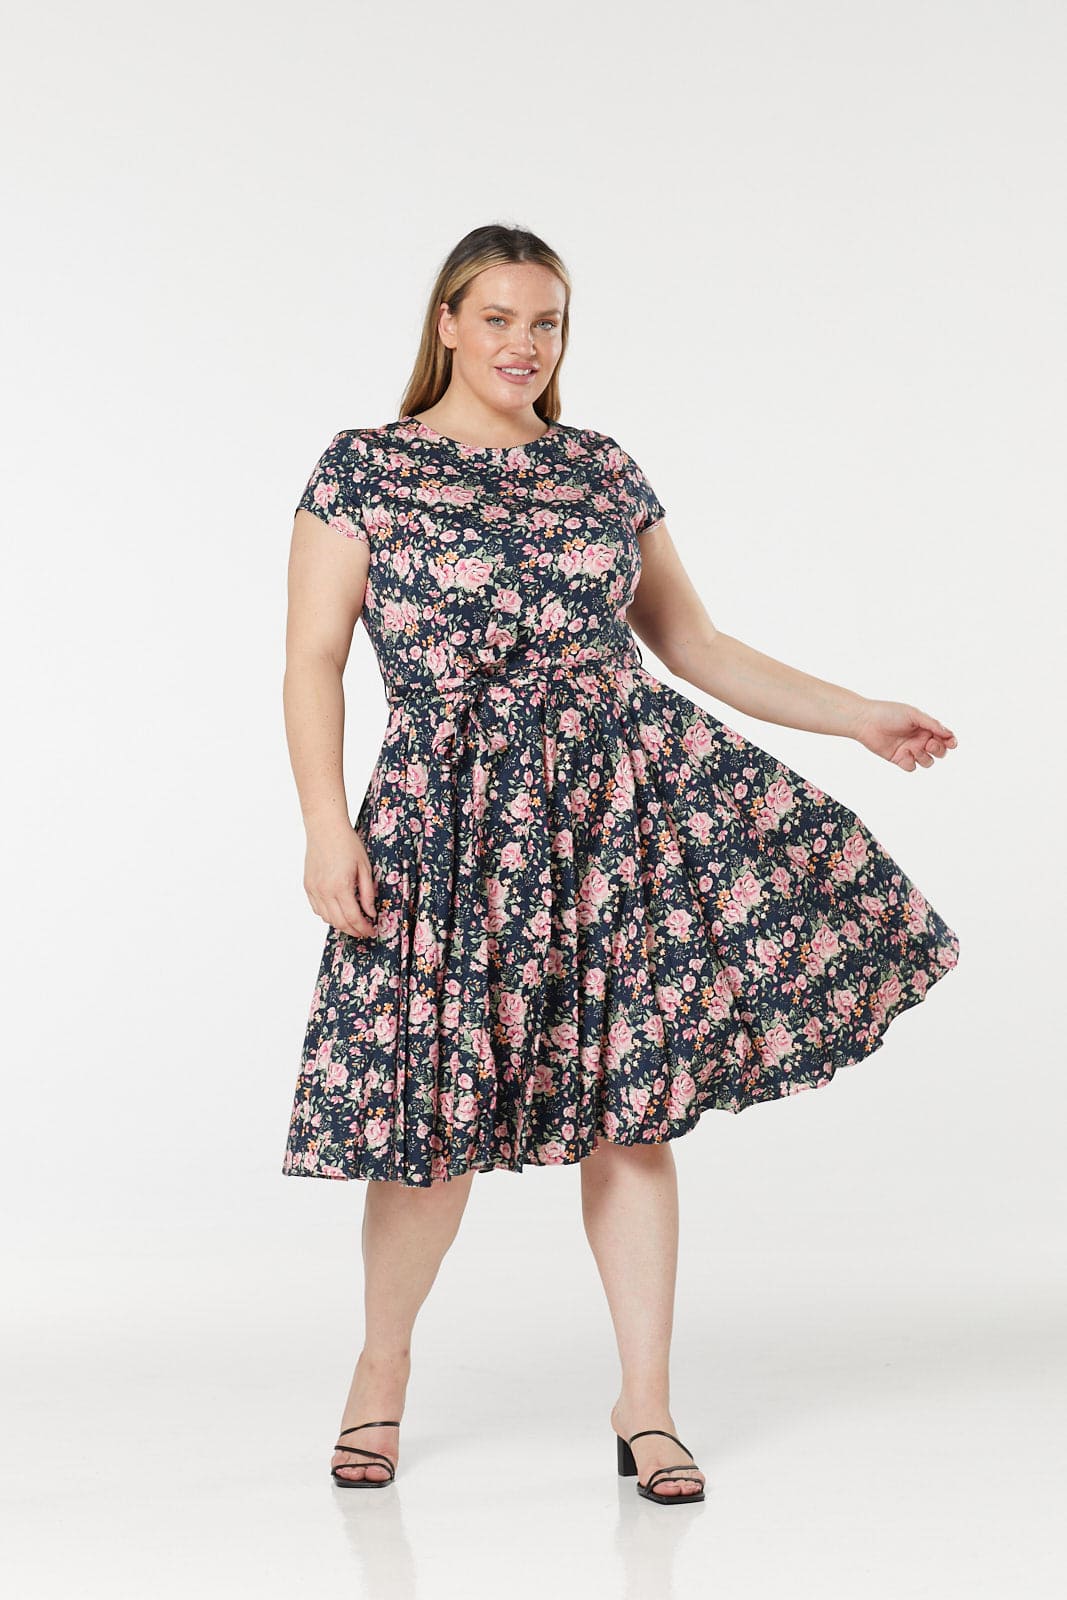 Cleo Floral Fit and Flare, Skater Midi Floral Dress